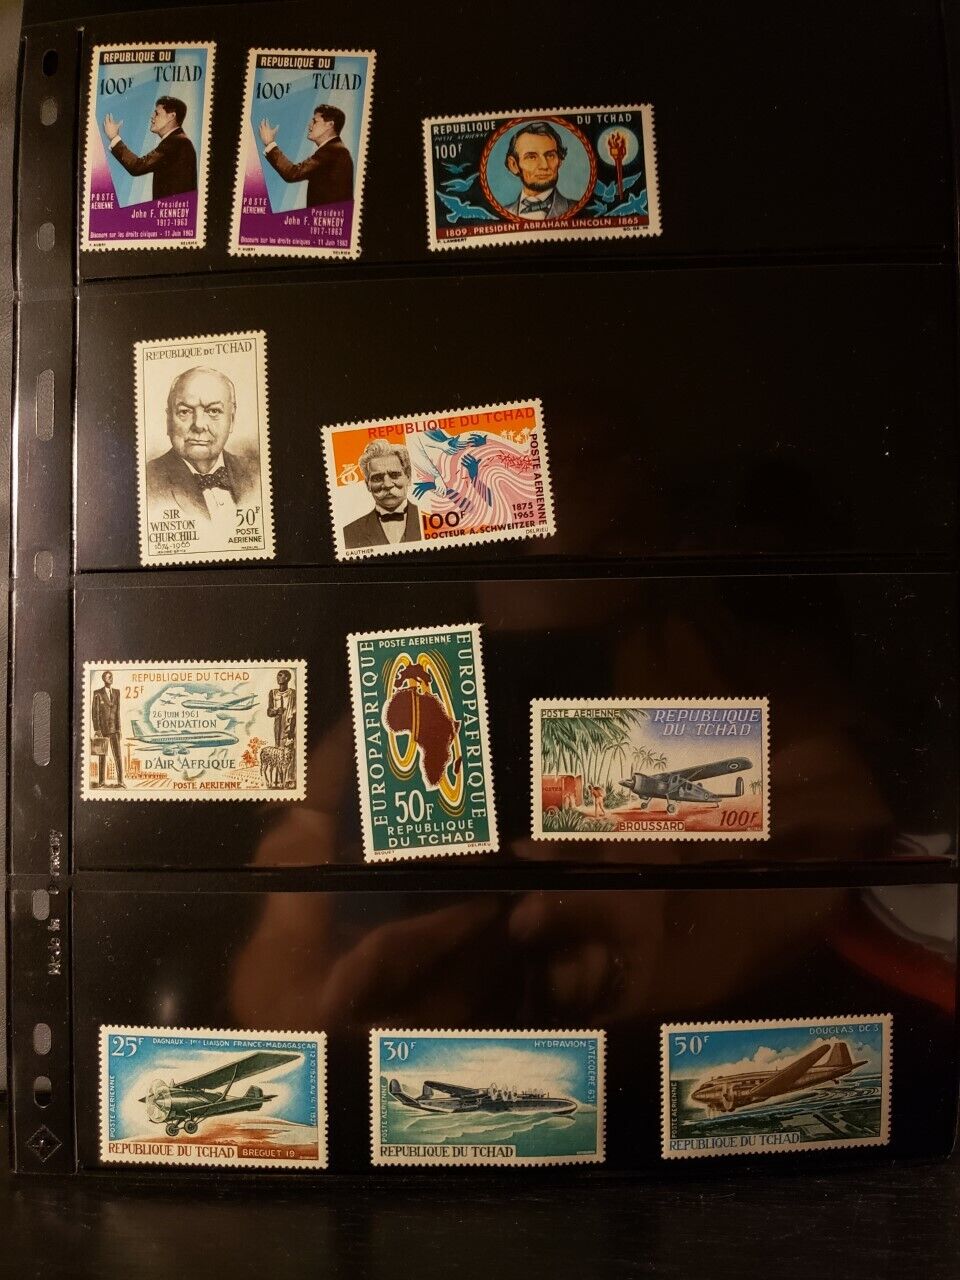 Chad Airmail Stamps Lot of 51 (including C84) - MNH - see details for list Без бренда